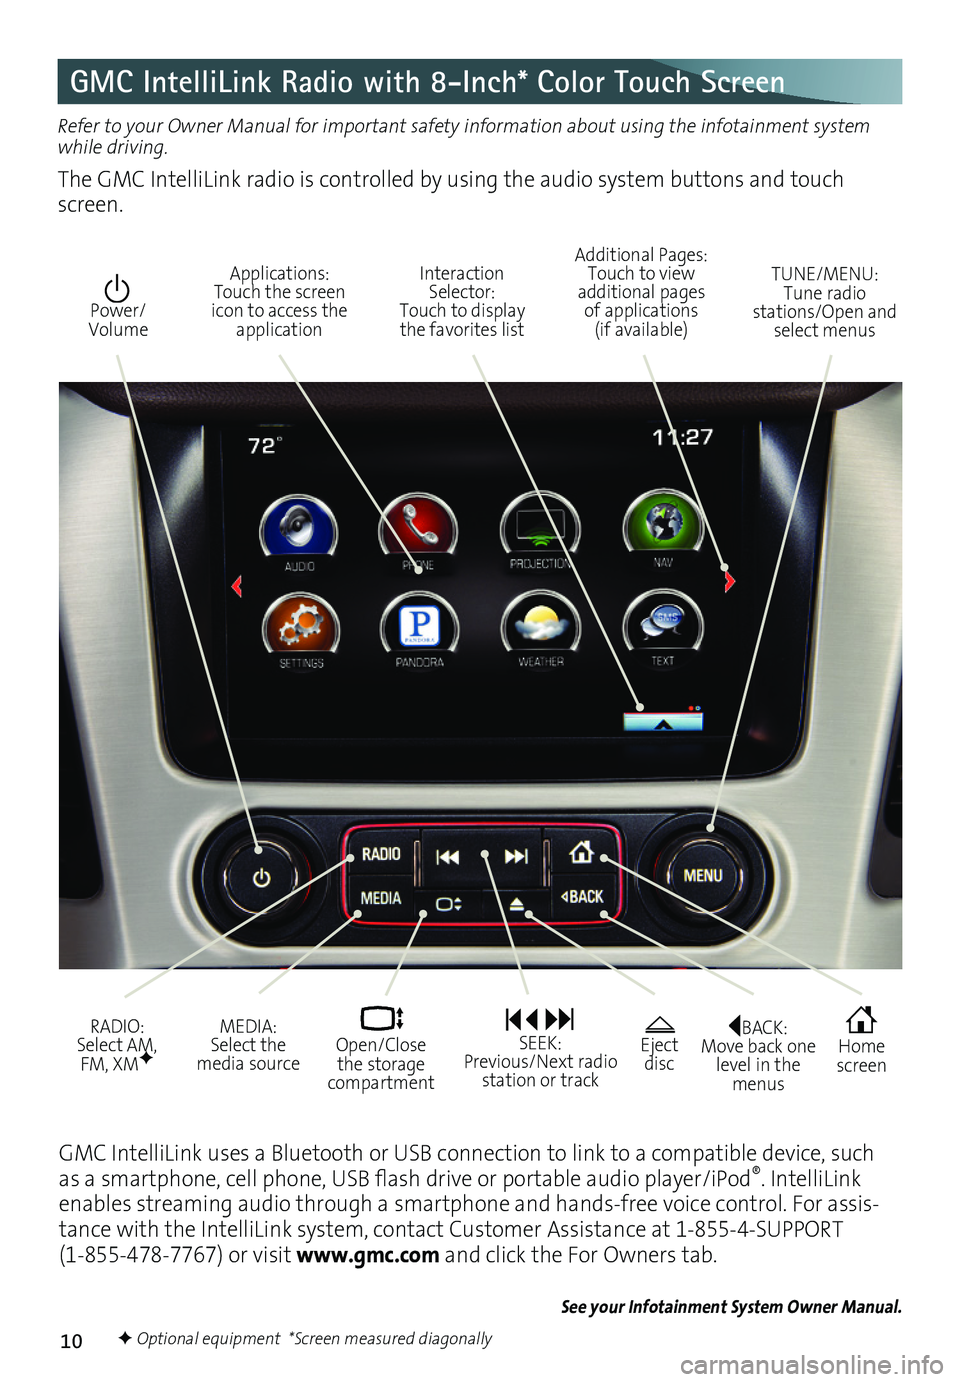 GMC YUKON 2016  Get To Know Guide 10
GMC IntelliLink Radio with 8-Inch* Color Touch Screen
Refer to your Owner Manual for important safety information about using the infotainment system while driving. 
The GMC IntelliLink radio is co